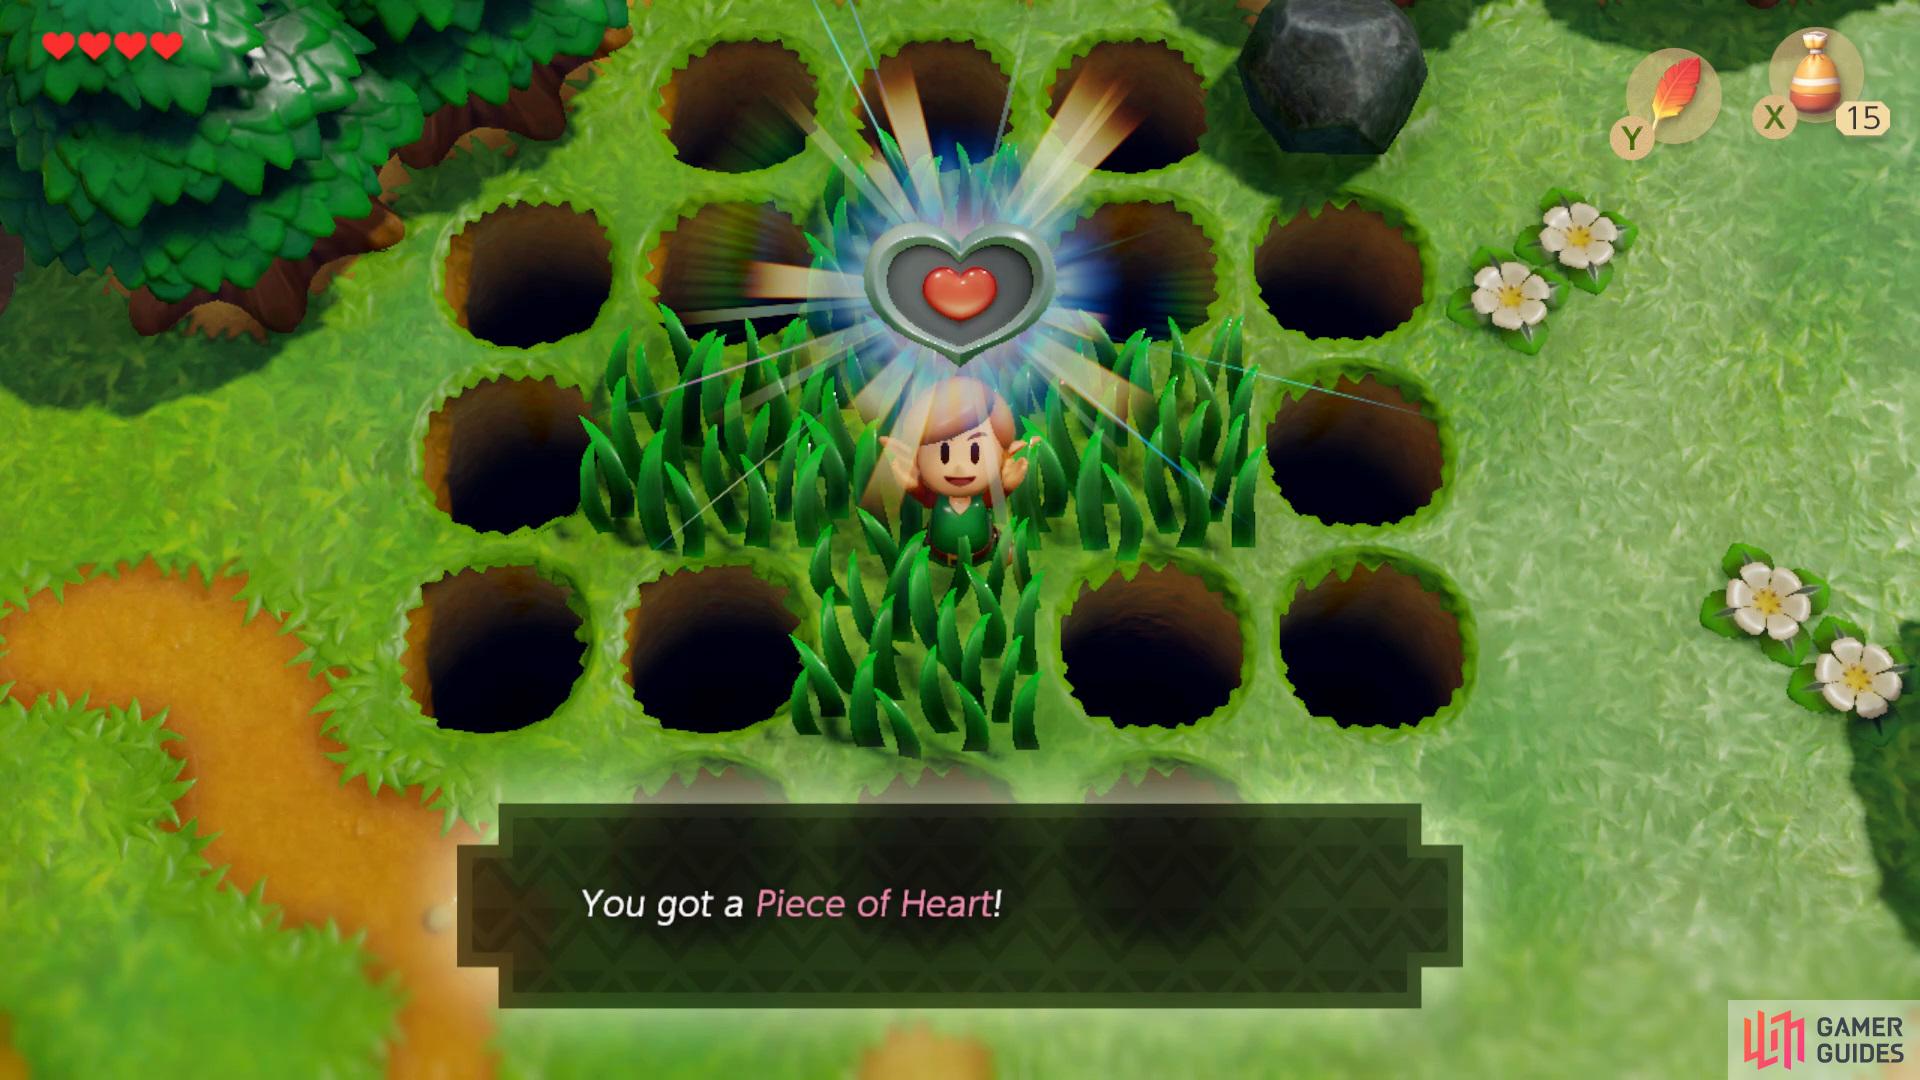 then head through the Mysterious Forest to Koholint Prairie to find a Piece of Heart in the middle of some holes, 